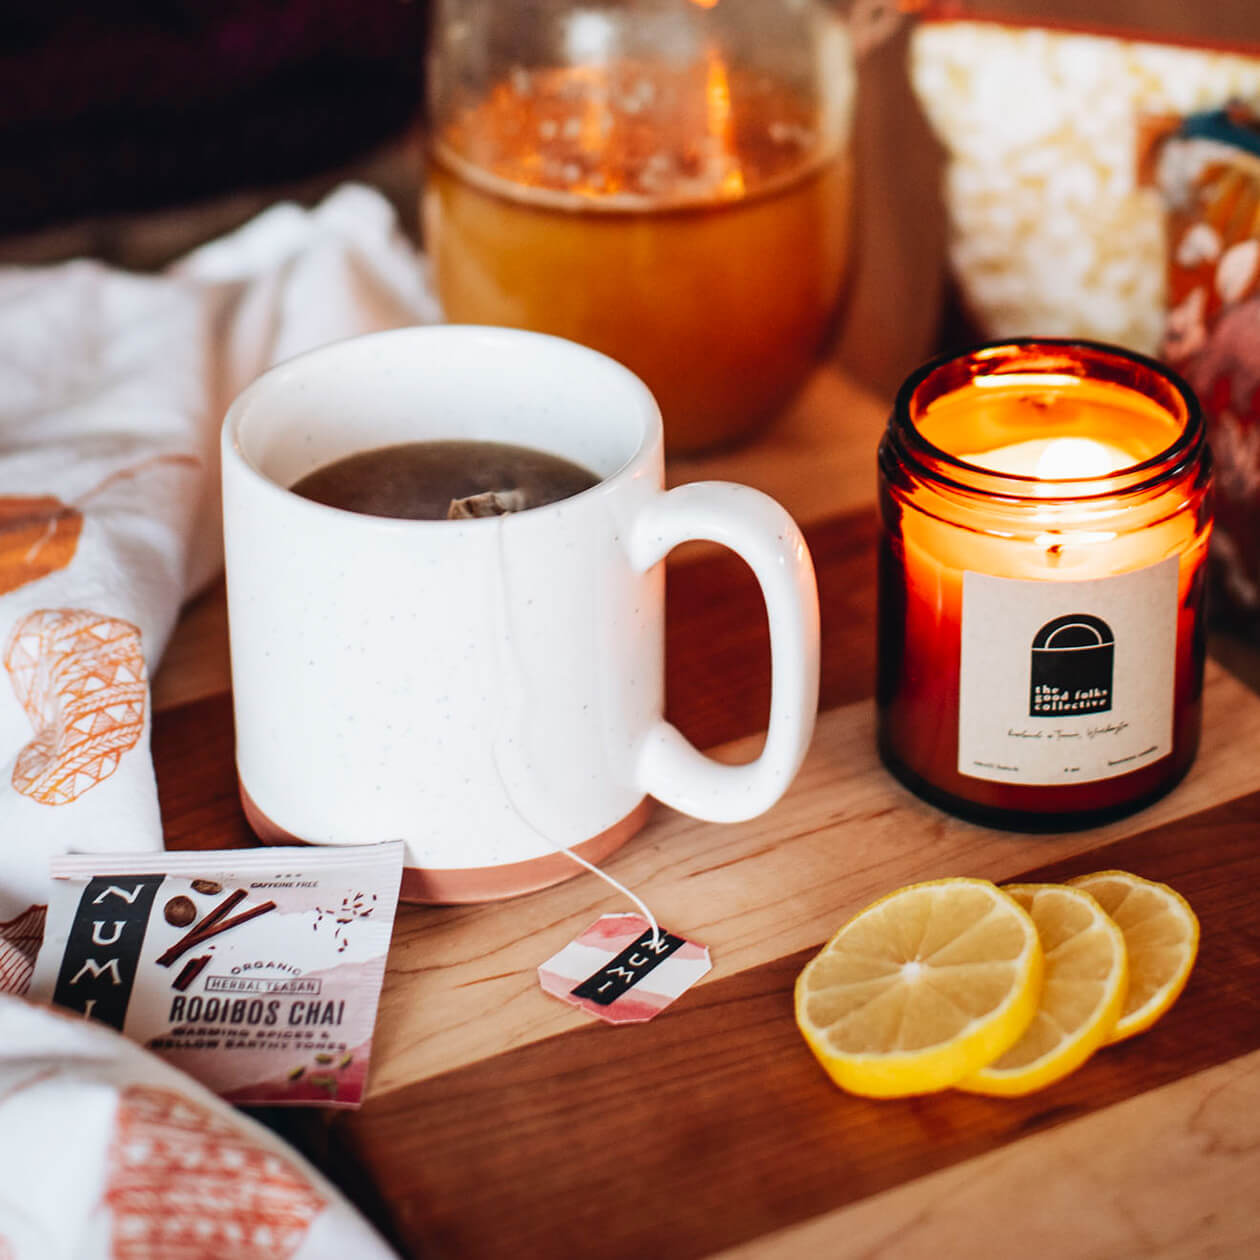 A cup of hot Rooibos Chai brewing on a table with lemon slices and a candle